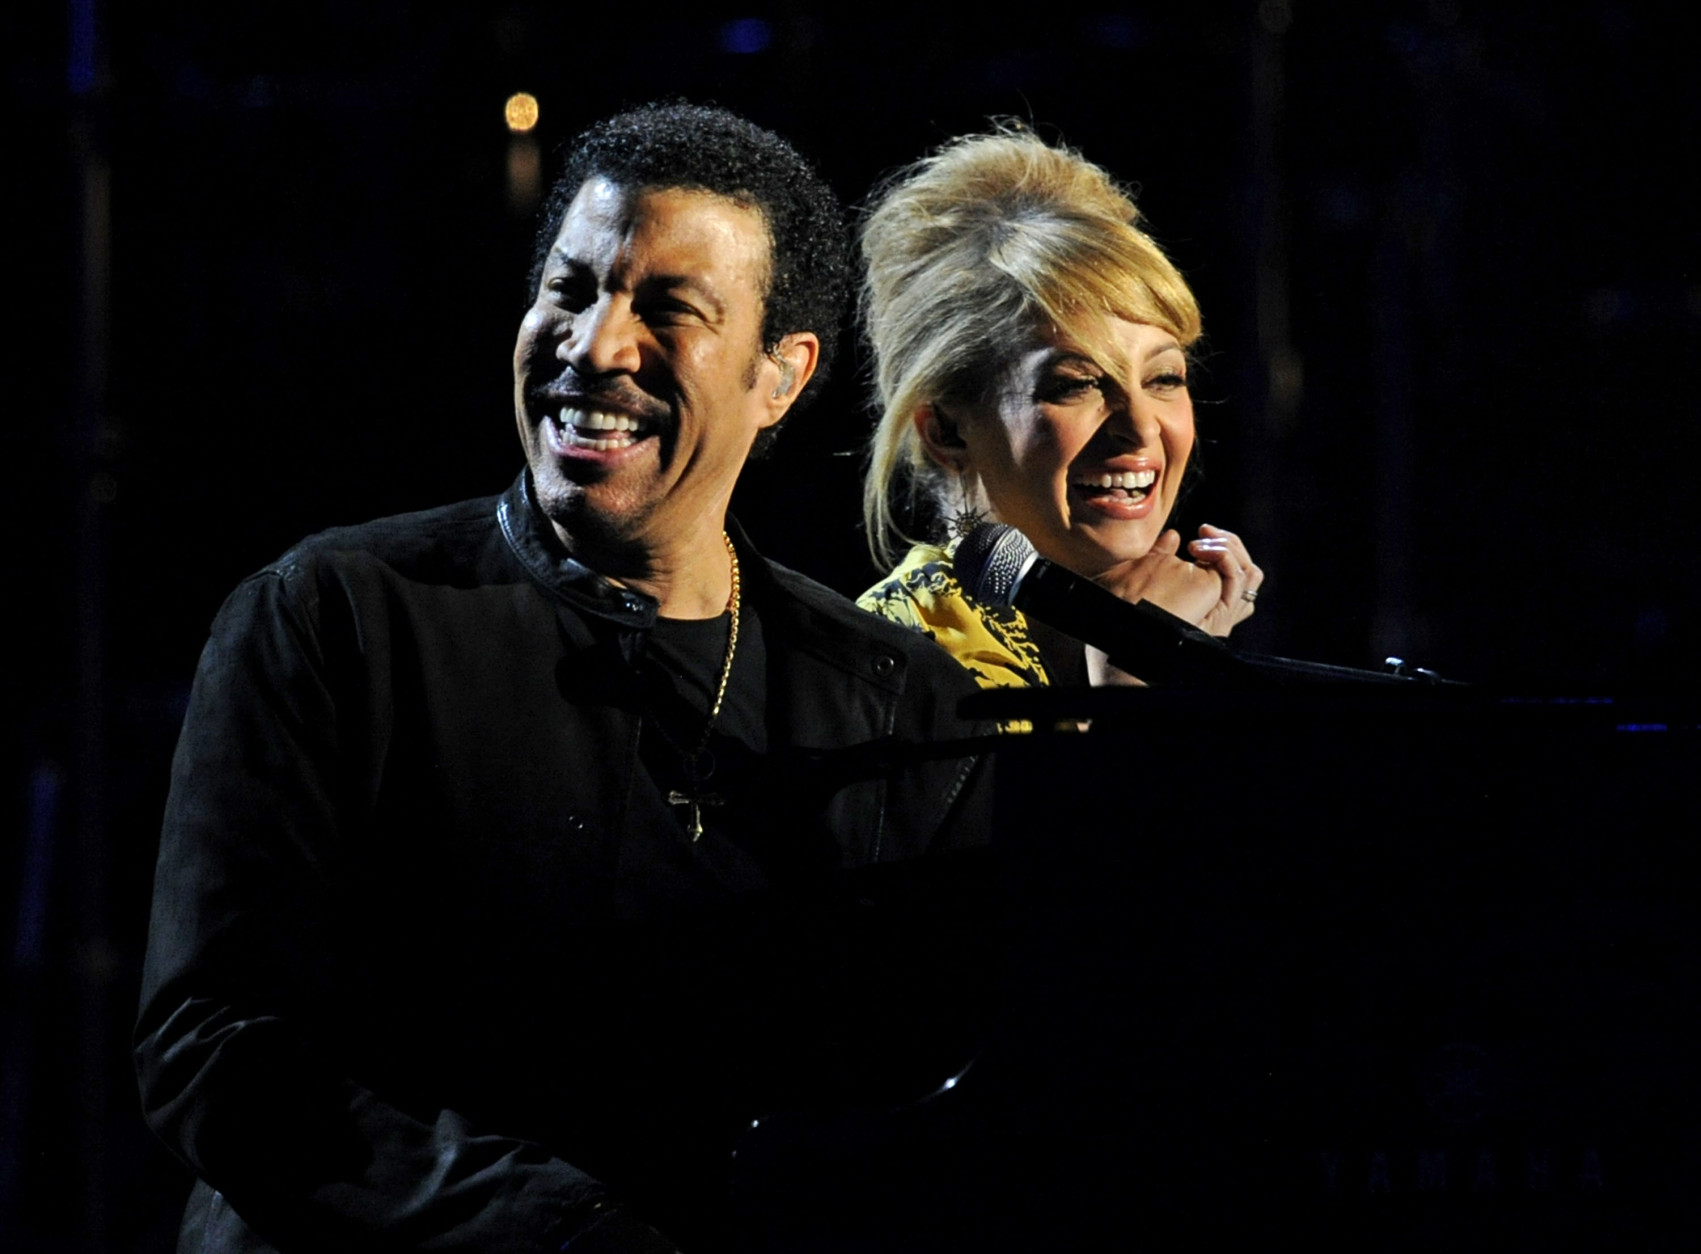 LAS VEGAS, NV - APRIL 02:  Musician Lionel Richie (L) and his daughter Nicole Richie perform onstage during Lionel Richie and Friends in Concert presented by ACM held at the MGM Grand Garden Arena on April 2, 2012 in Las Vegas, Nevada.  (Photo by Ethan Miller/Getty Images)